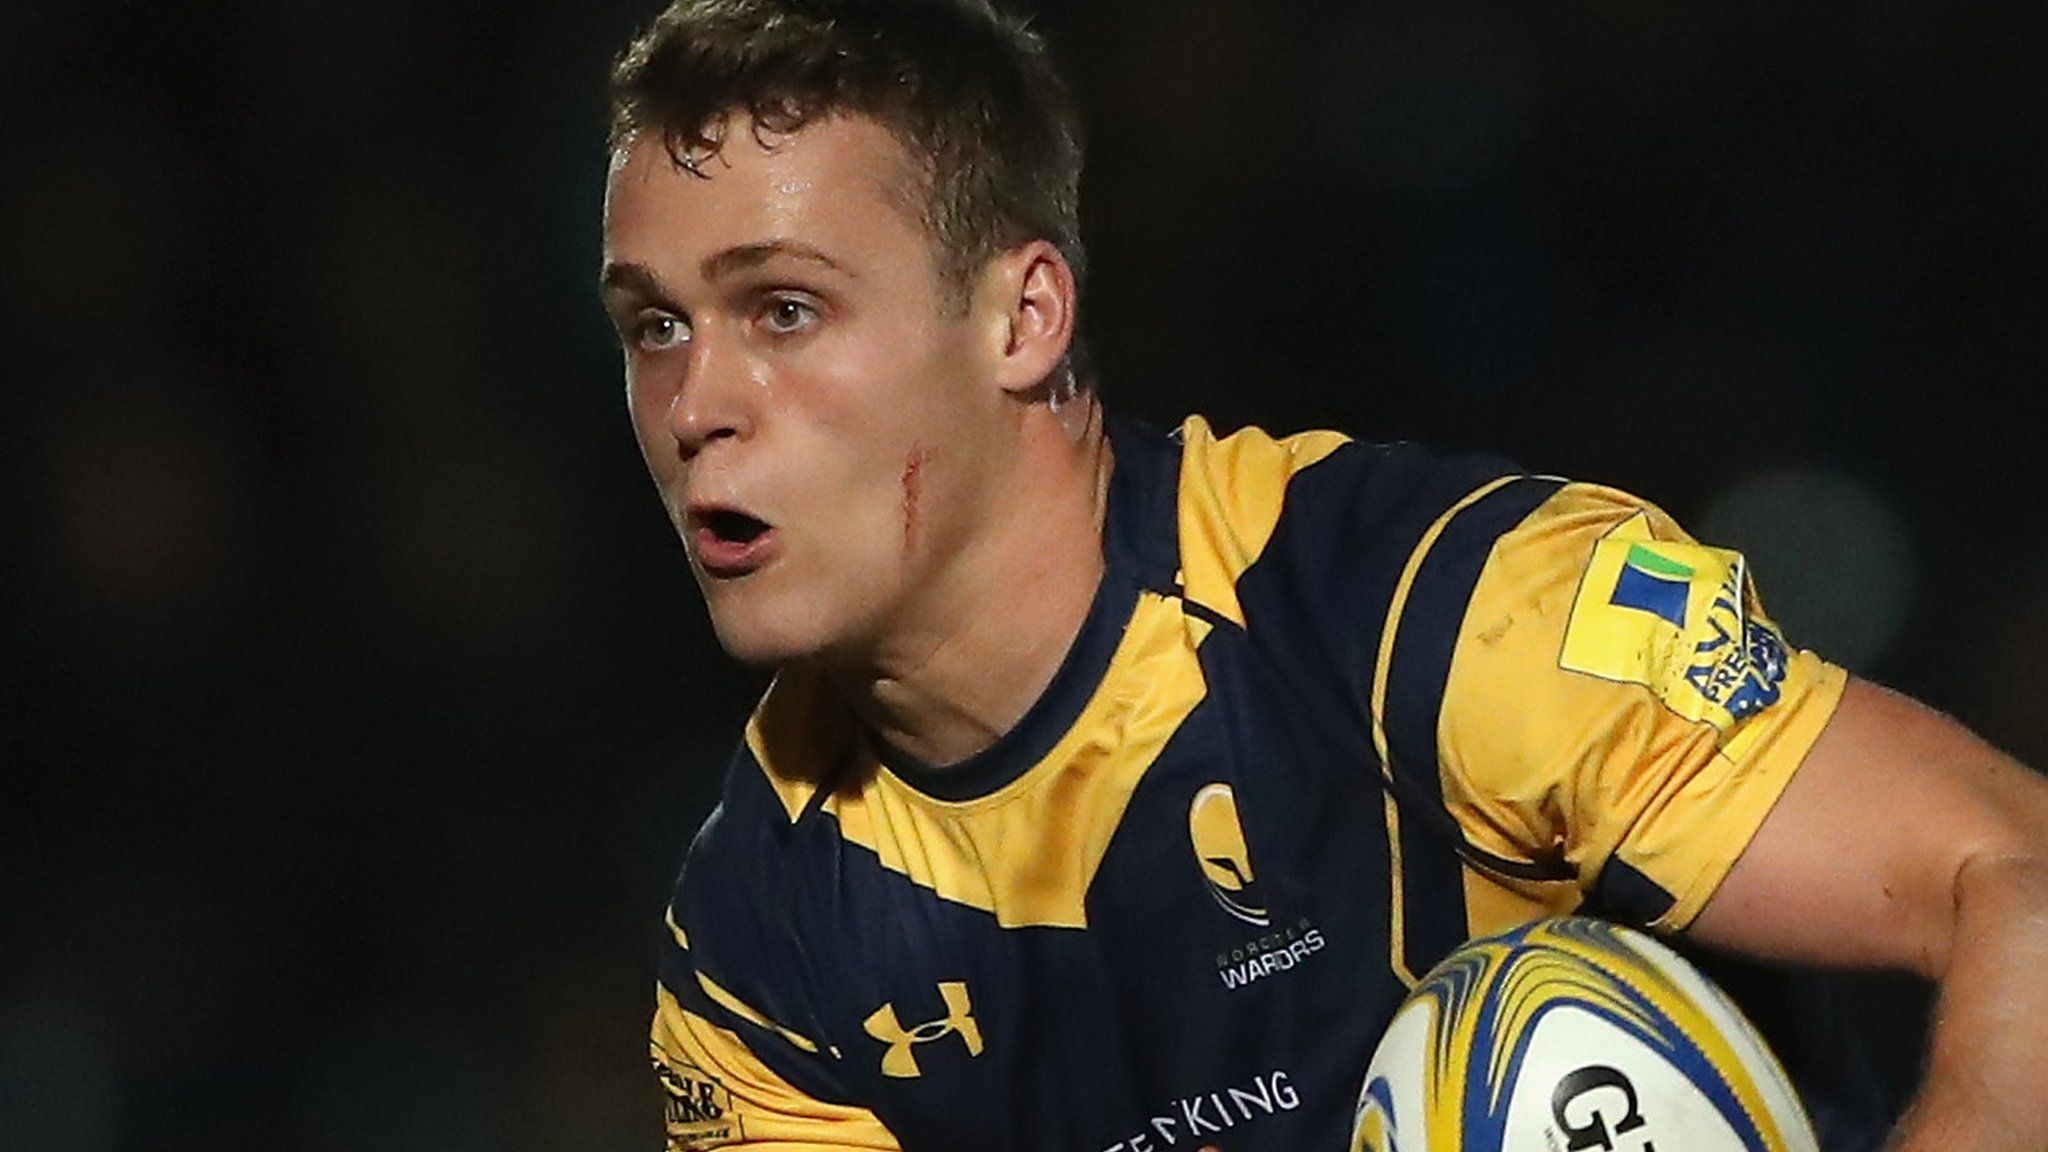 Jamie Shillcock in action for Worcester Warriors